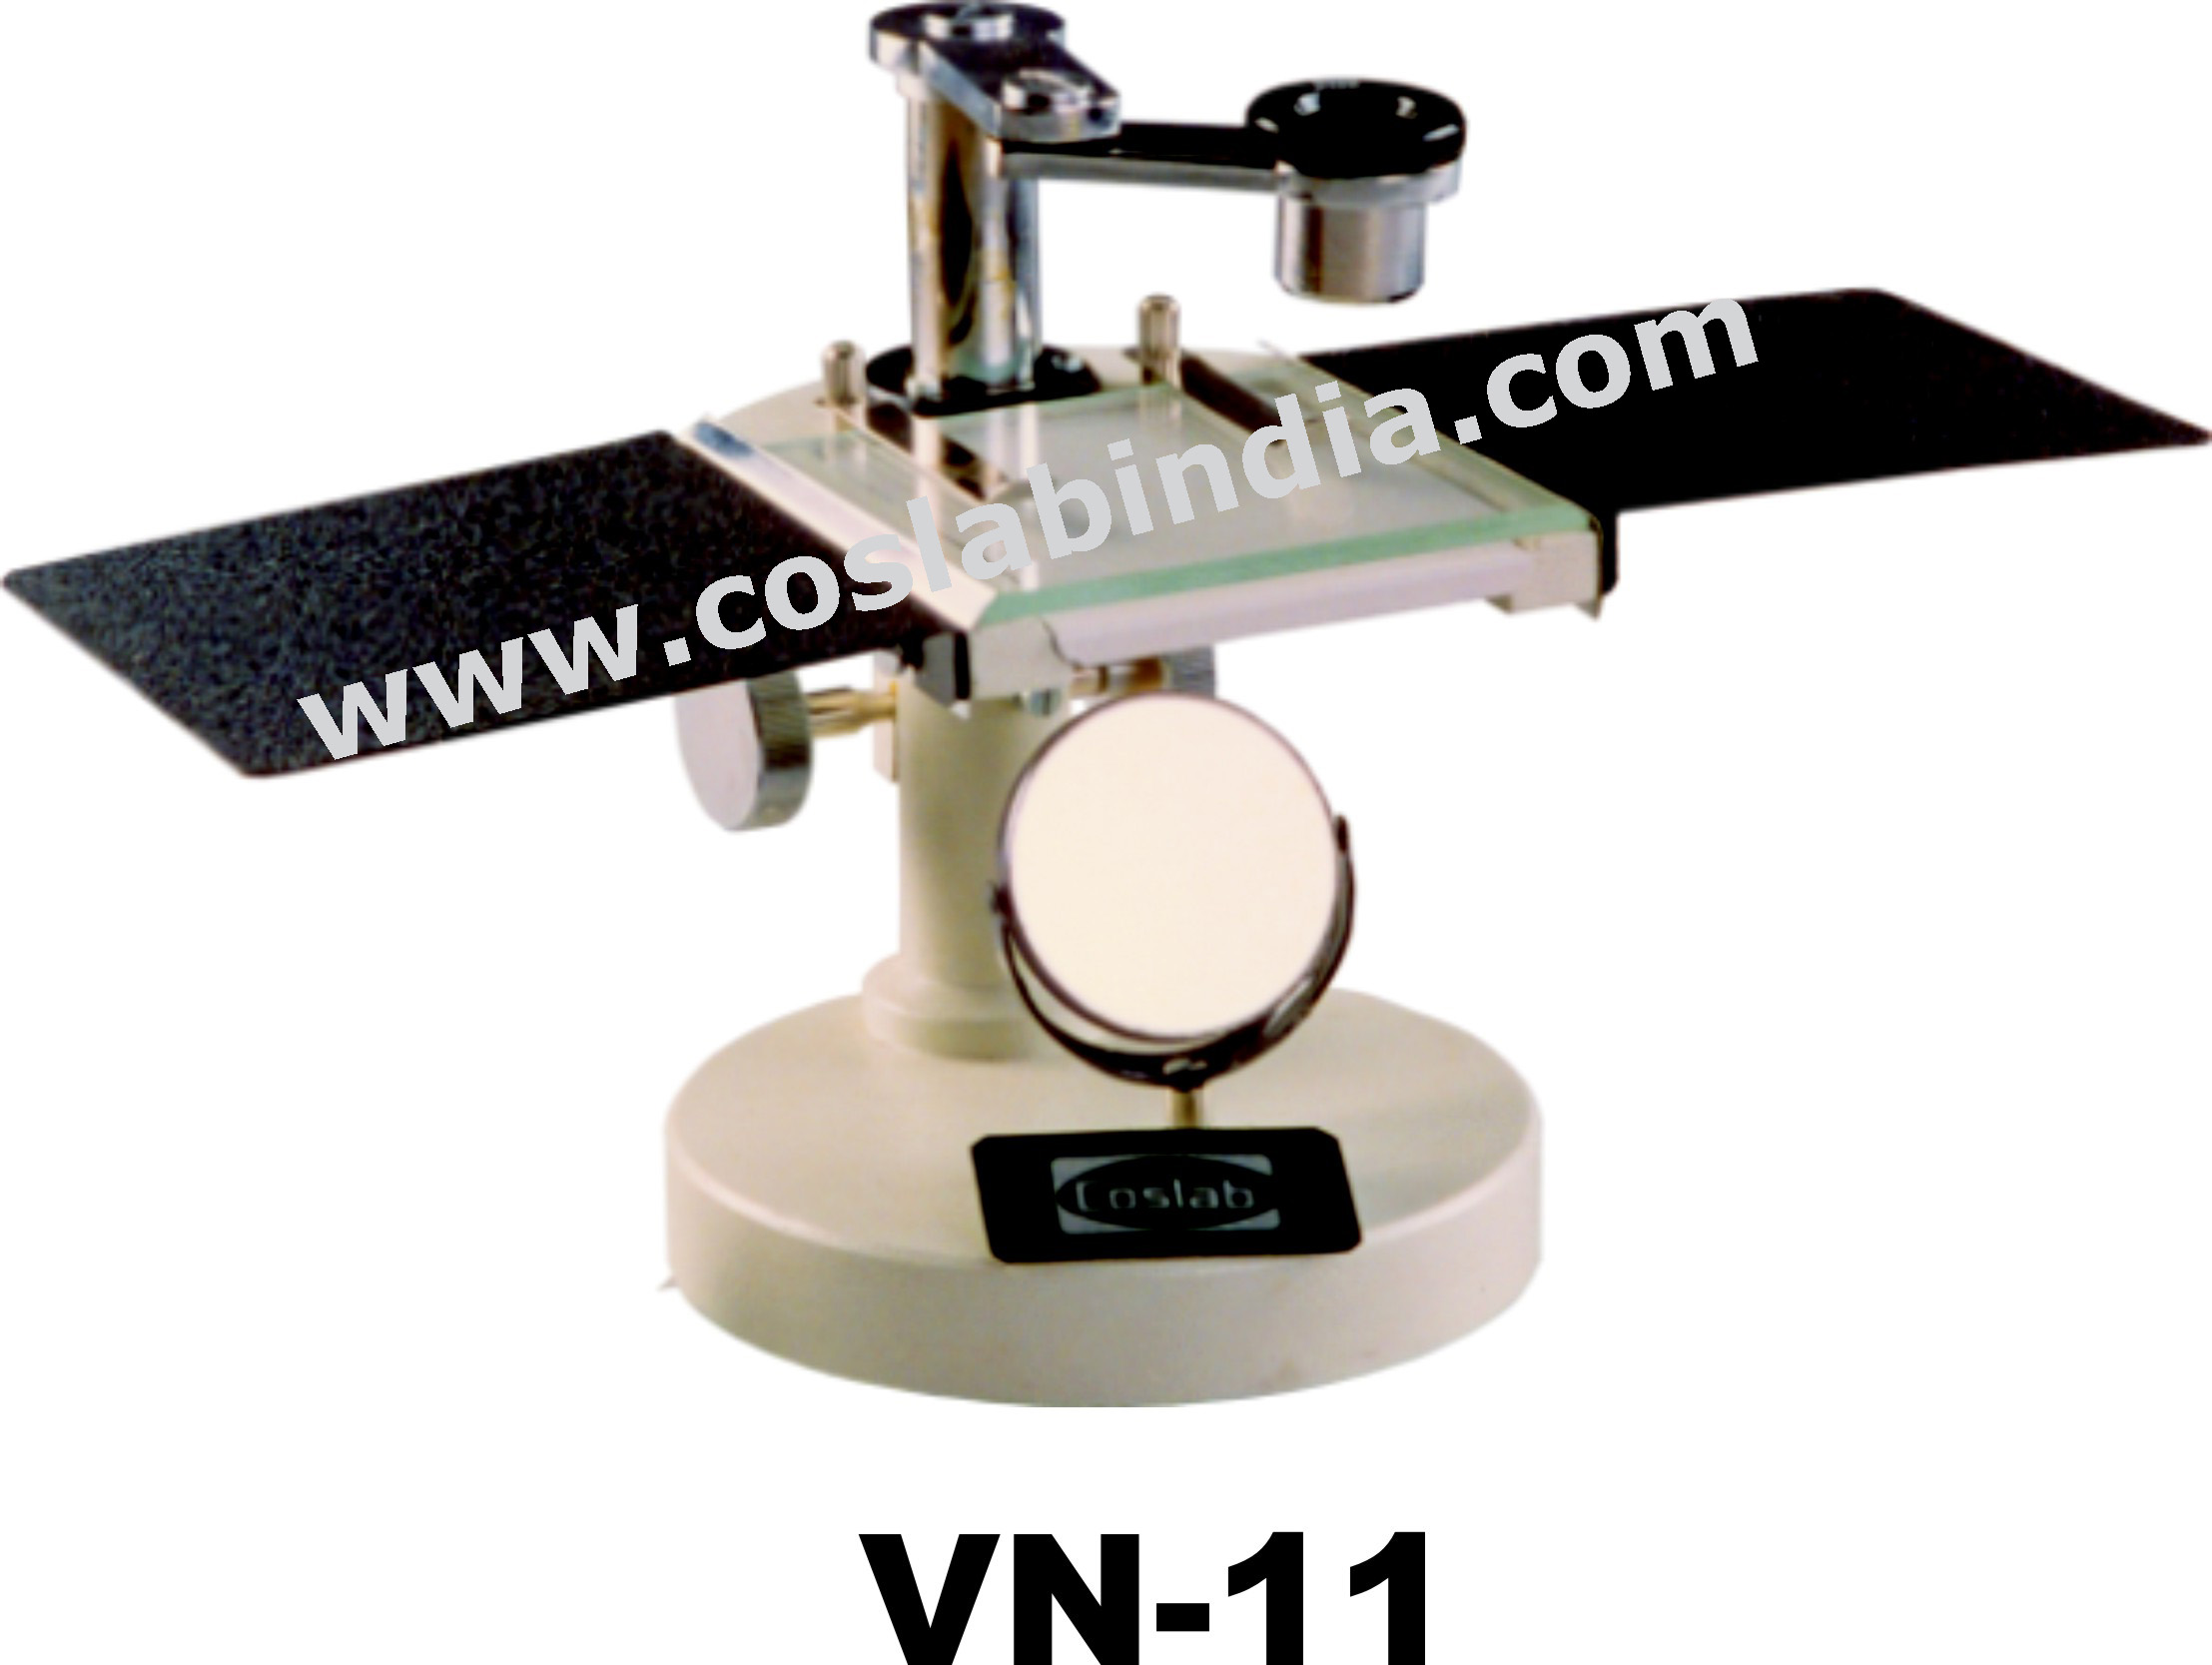 Dissecting Microscope - VN-11 / 10026